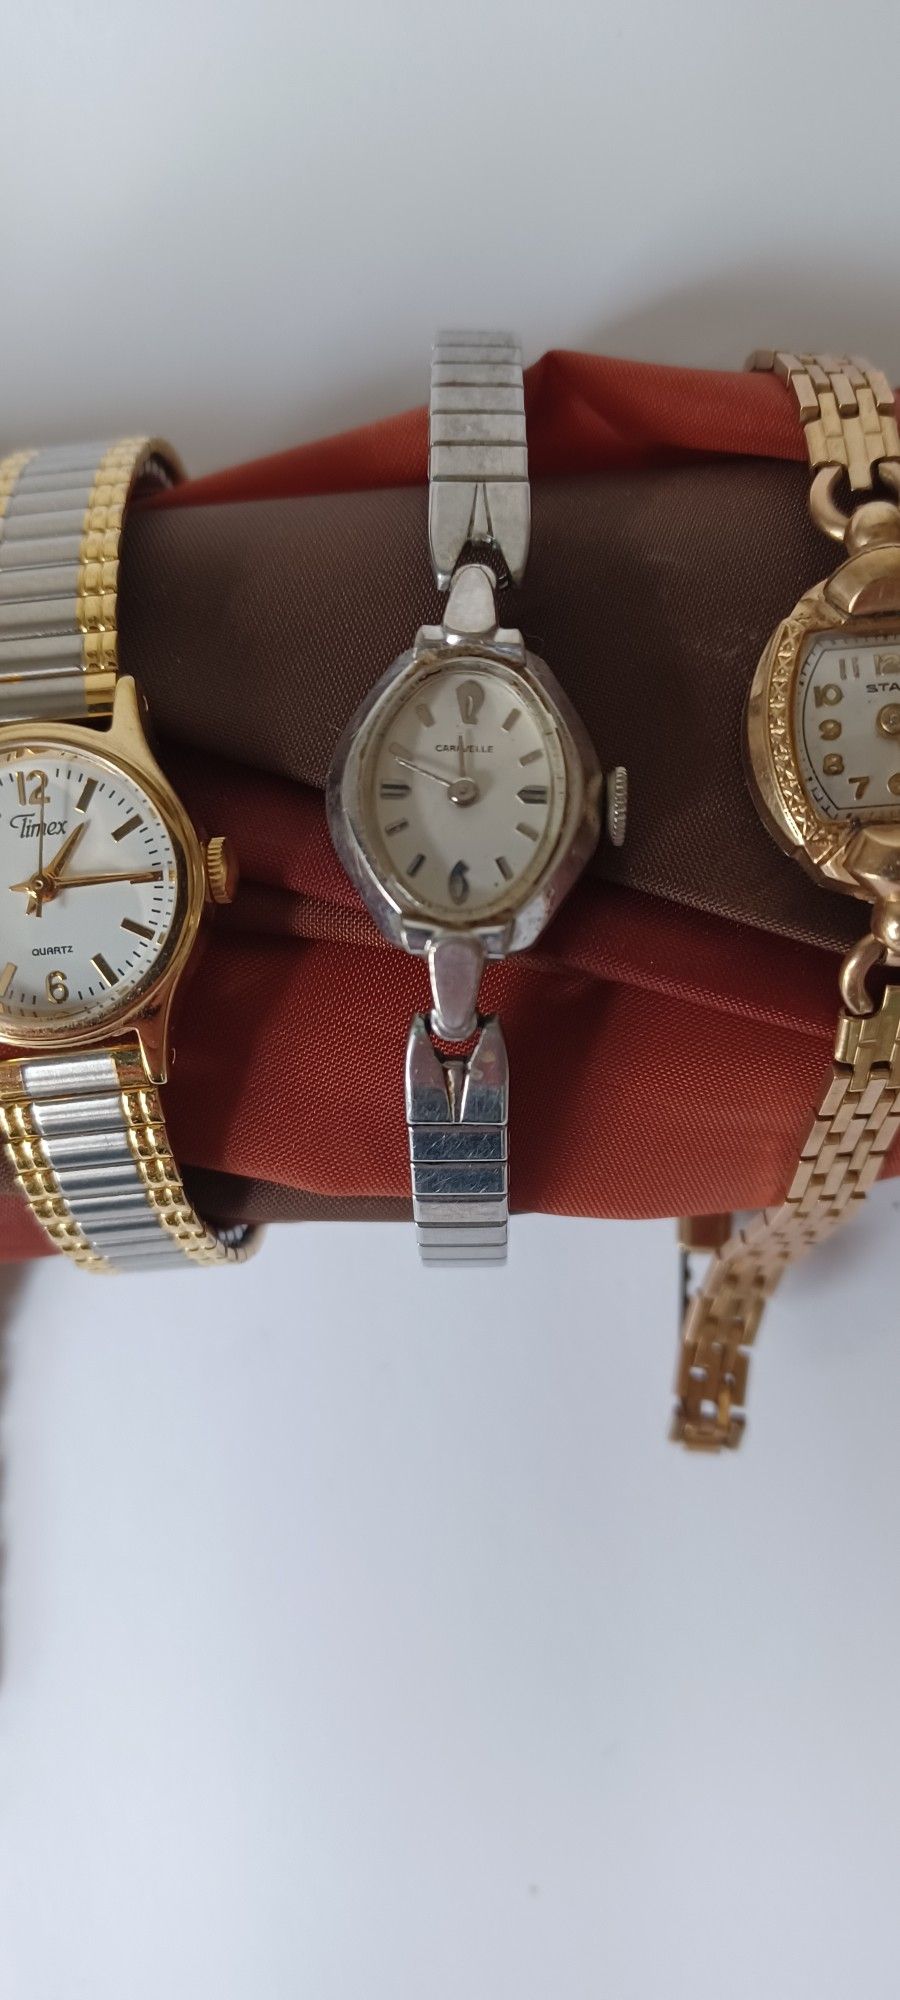 Caravelle Women's Watch 1940's and 1950's Jewelry 